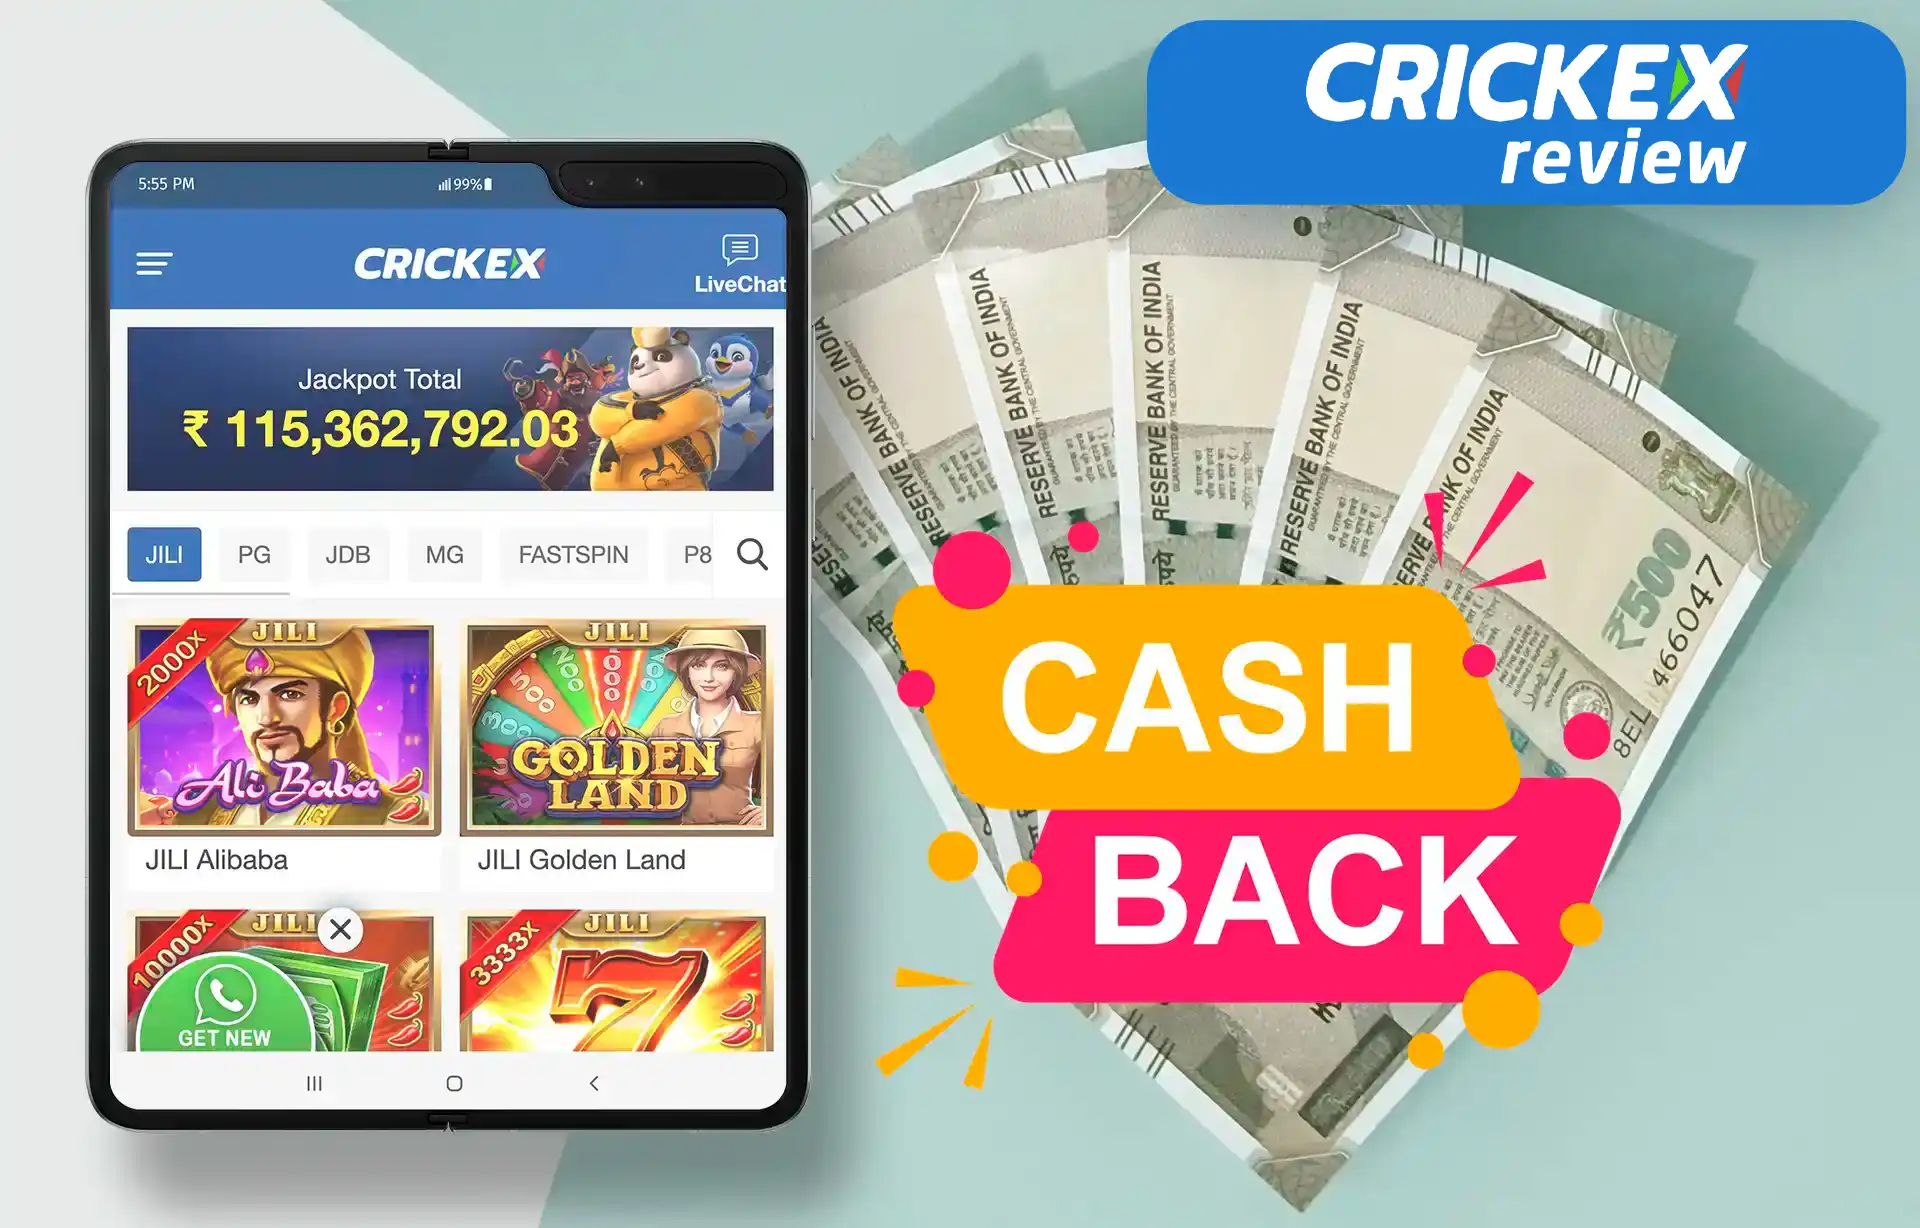 Users from Bangladesh can get 5% cashback on their account as a loyalty to Crickex.